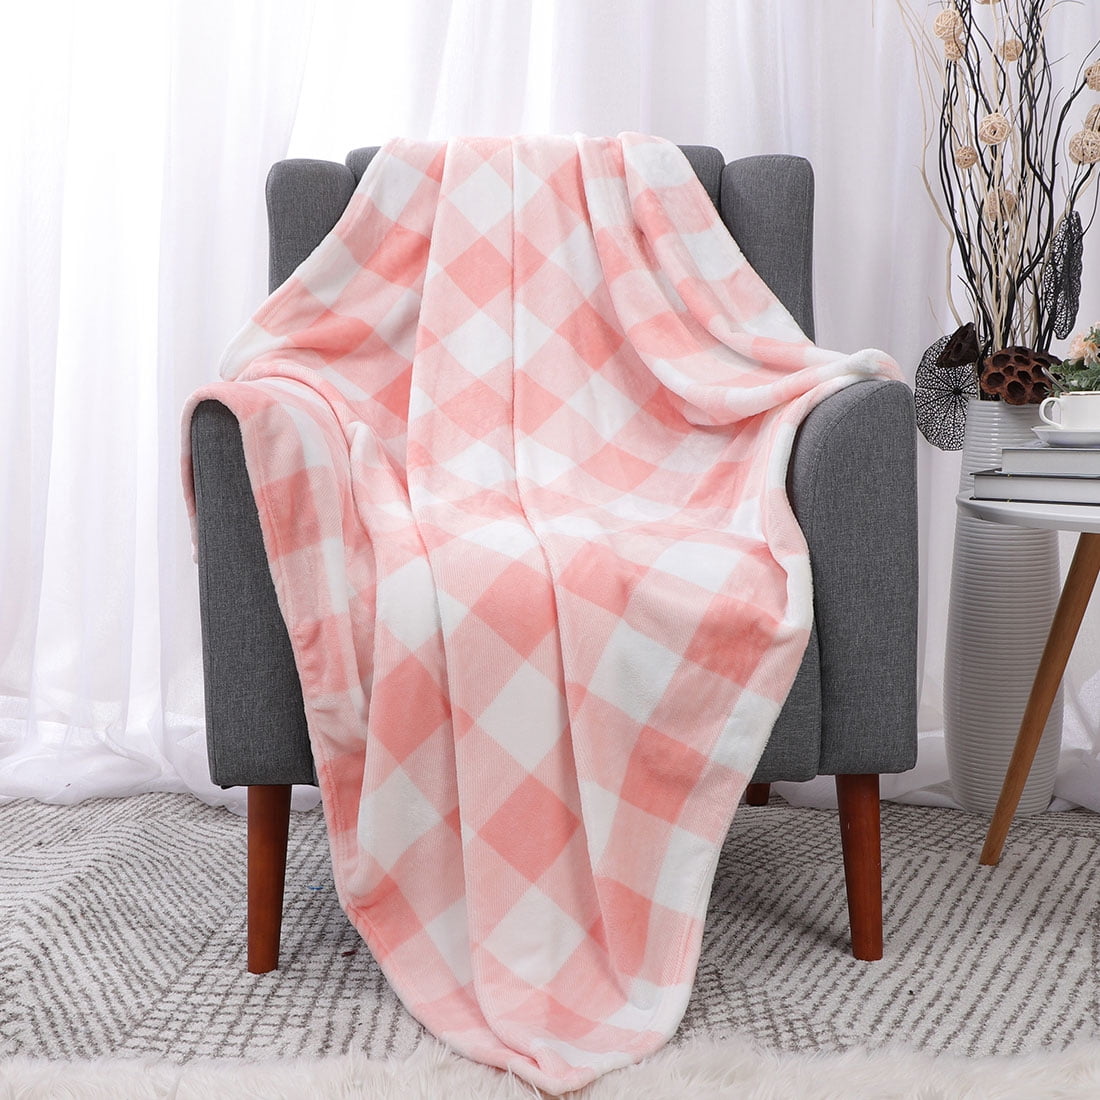 Dogs Buffalo Check Plaid Pink All-Season Lightweight Soft Cozy Flannel Fleece Plush Throw Blanket for Travel Bed Sofa Double-Sided Print 